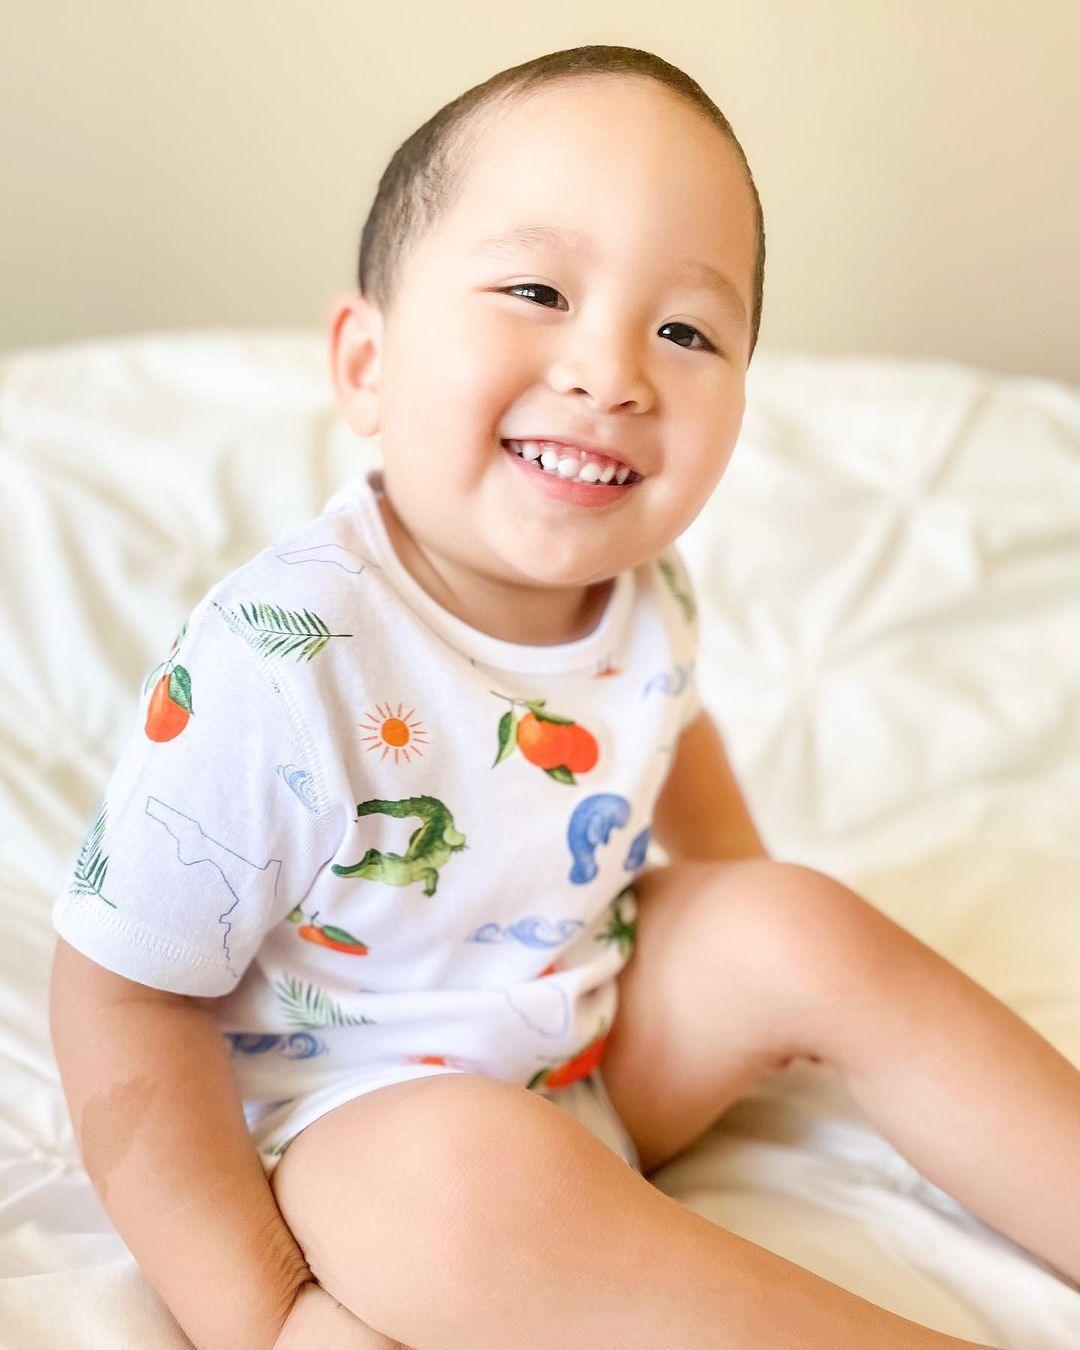 Toddler wearing Florida-themed pajamas with colorful state icons, standing on a white background.